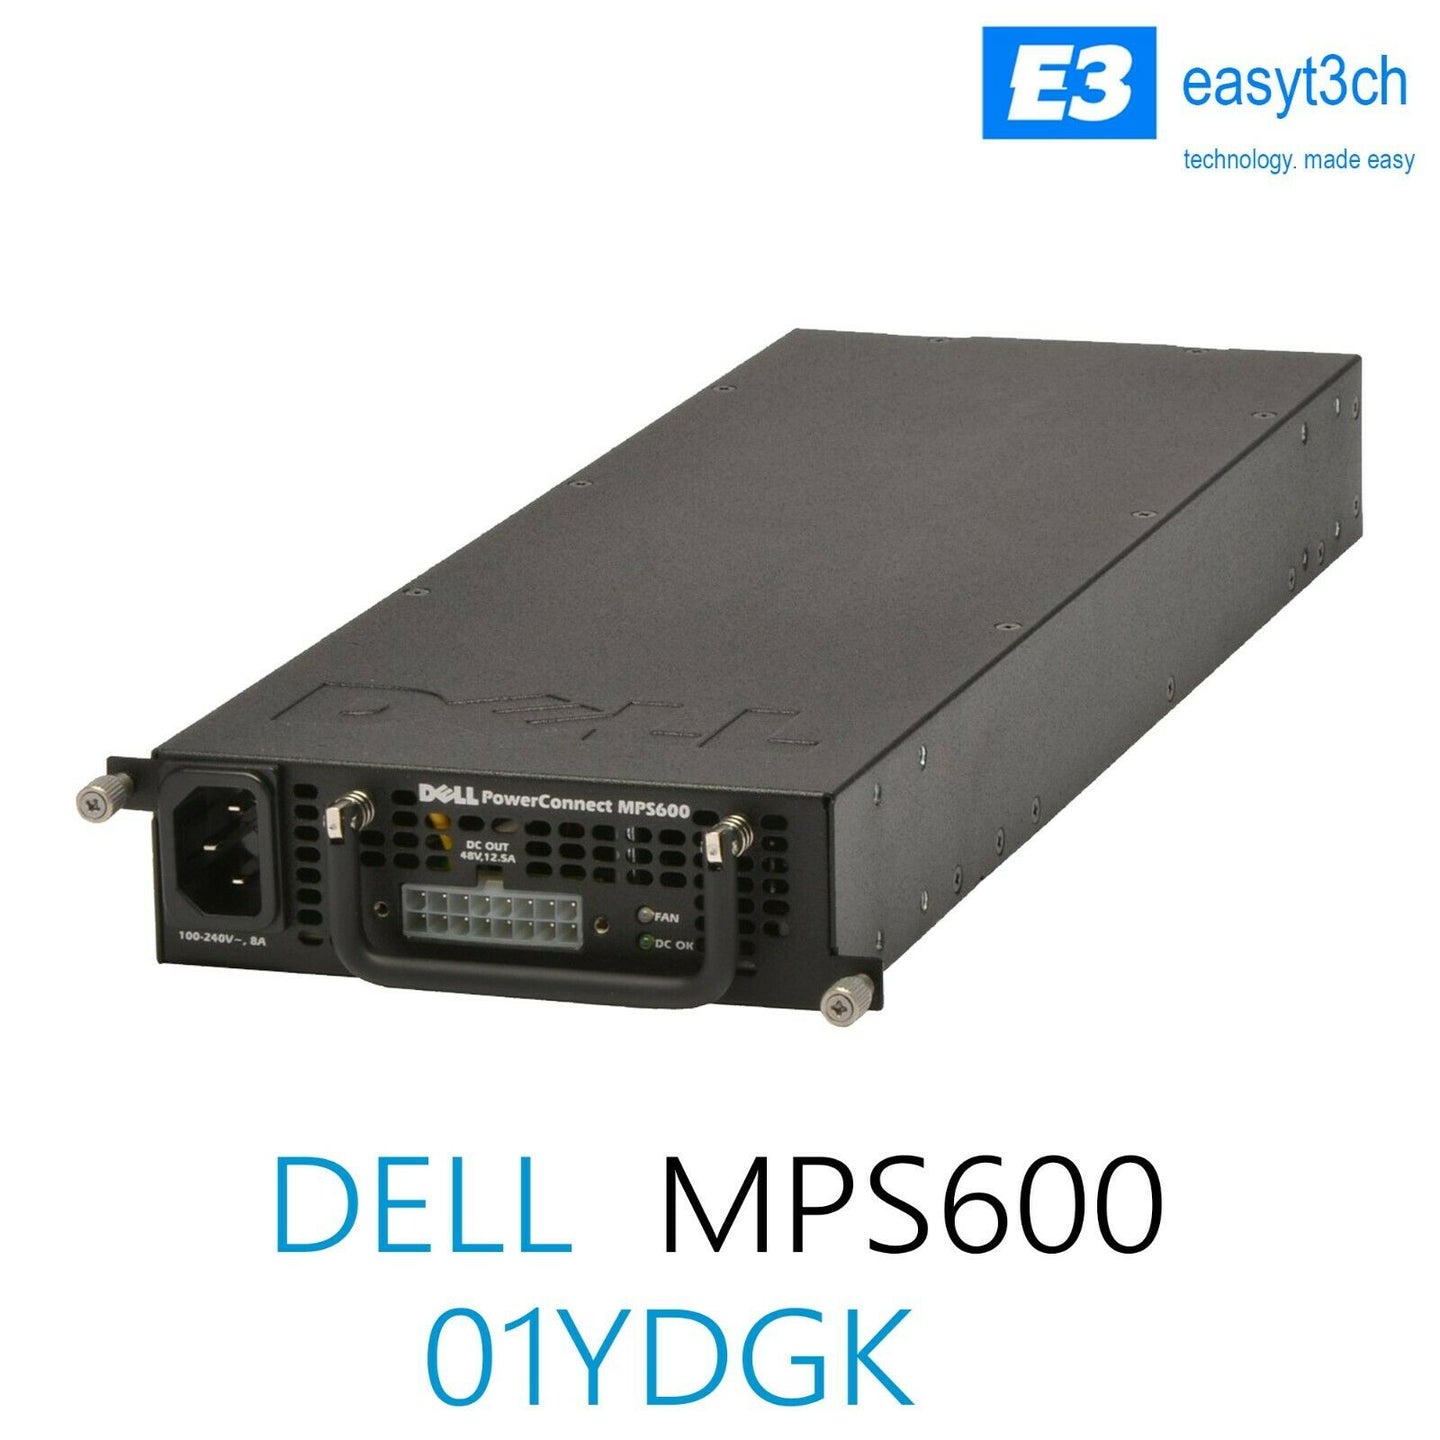 Dell PowerConnect MPS600 External Redundant Power Supply PSU 01YDGK 1YDGK